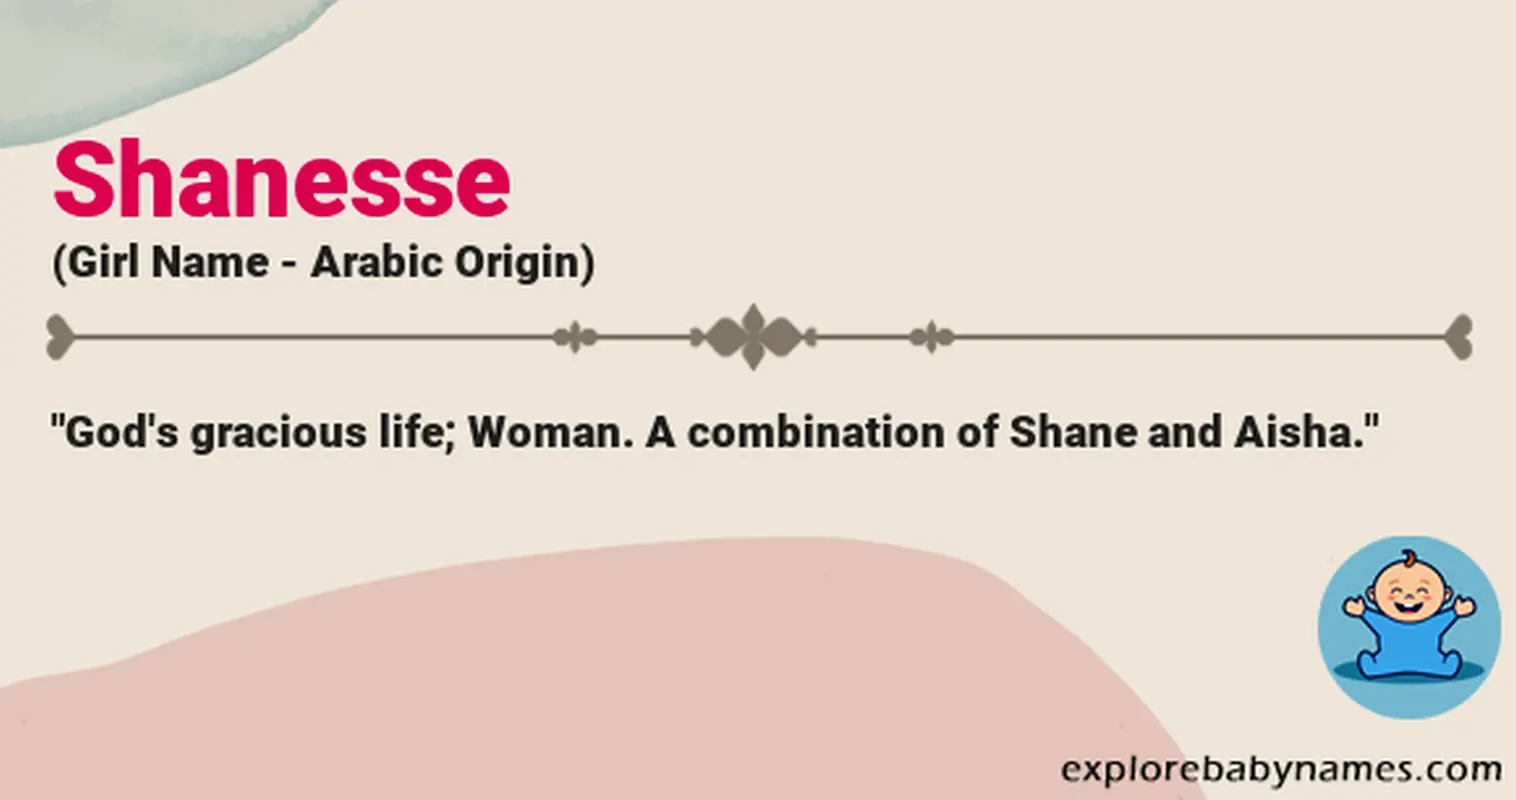 Meaning of Shanesse